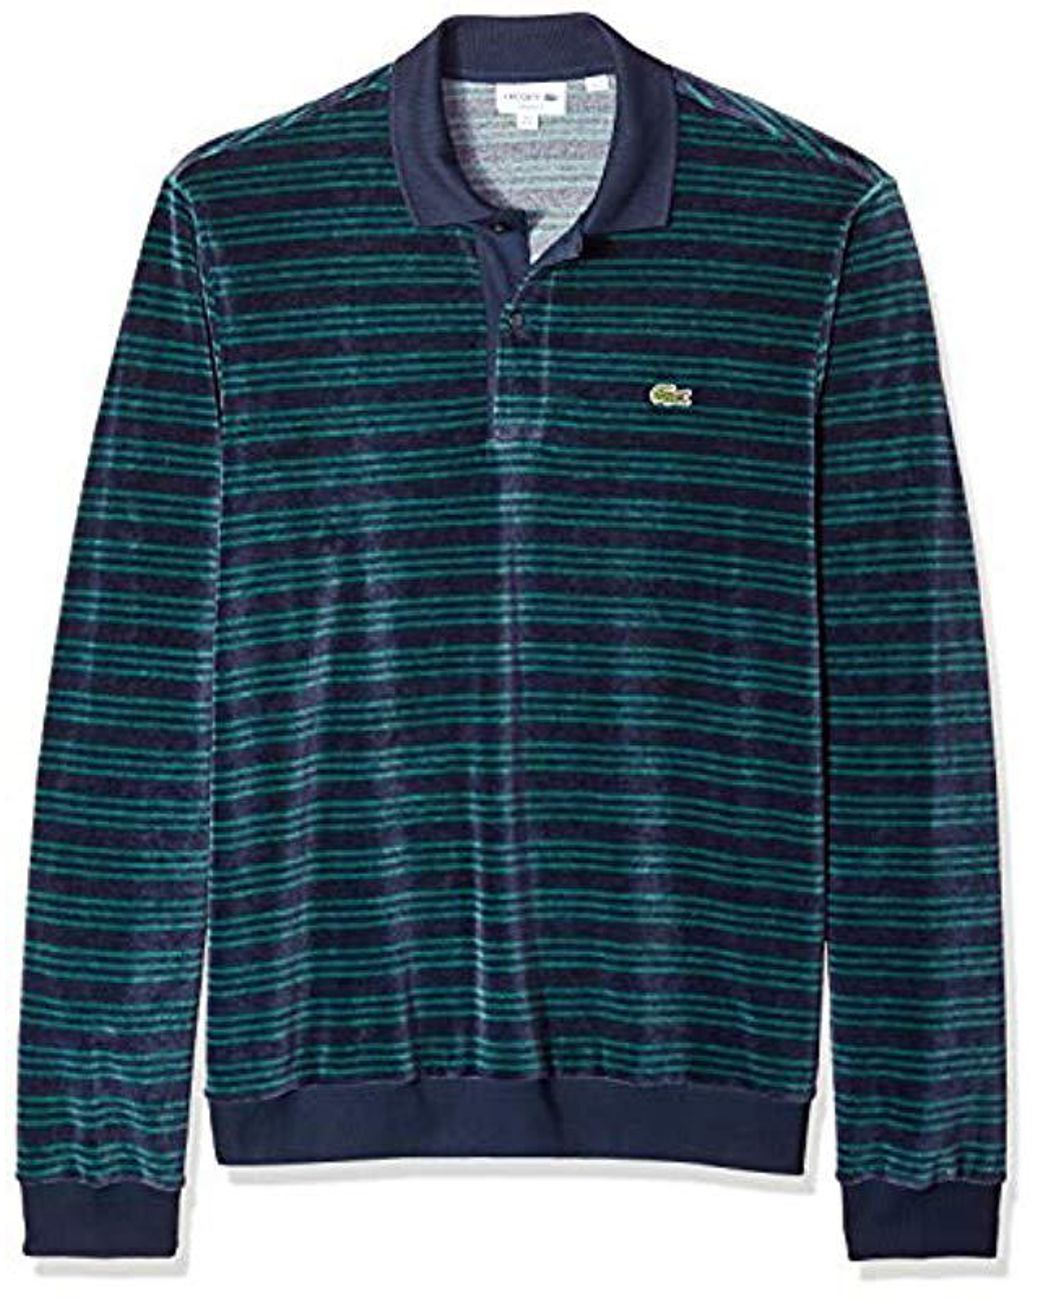 Lacoste Long Sleeve Relaxed Fit Striped Velour Polo in Blue for Men - Lyst